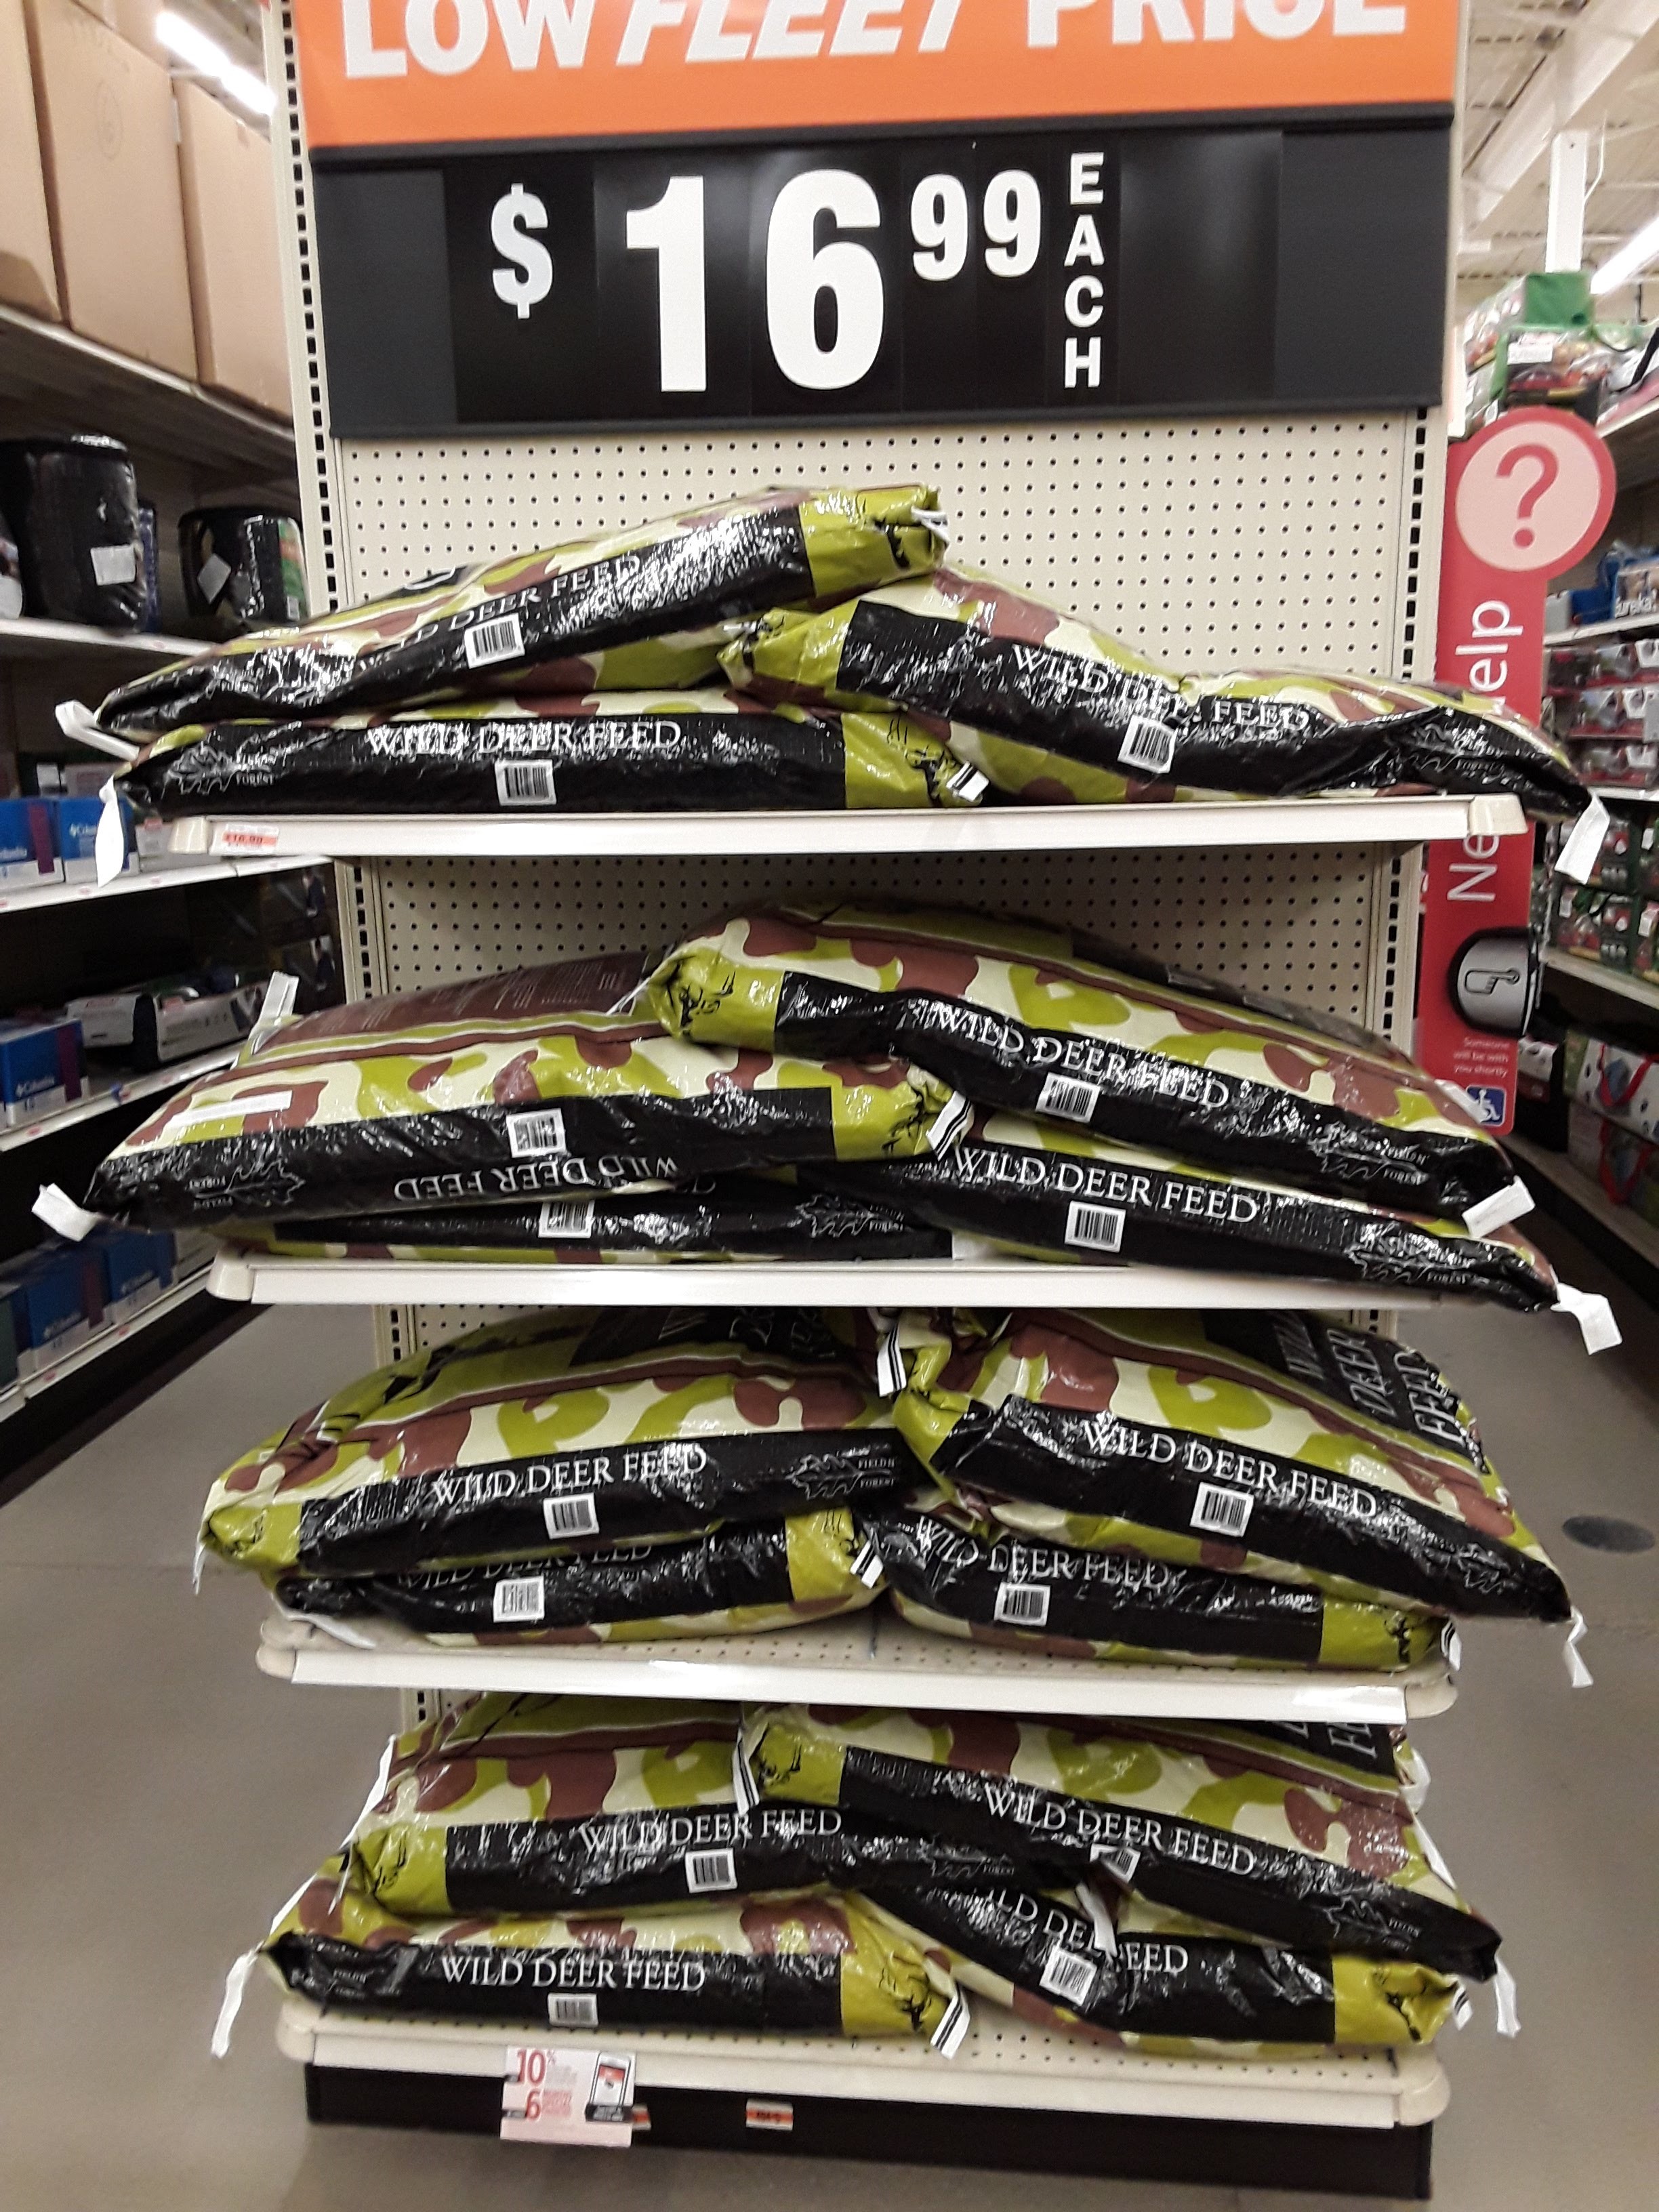 The same endcap a few weeks later (2018-October-22).  A few bags of Corn are missing